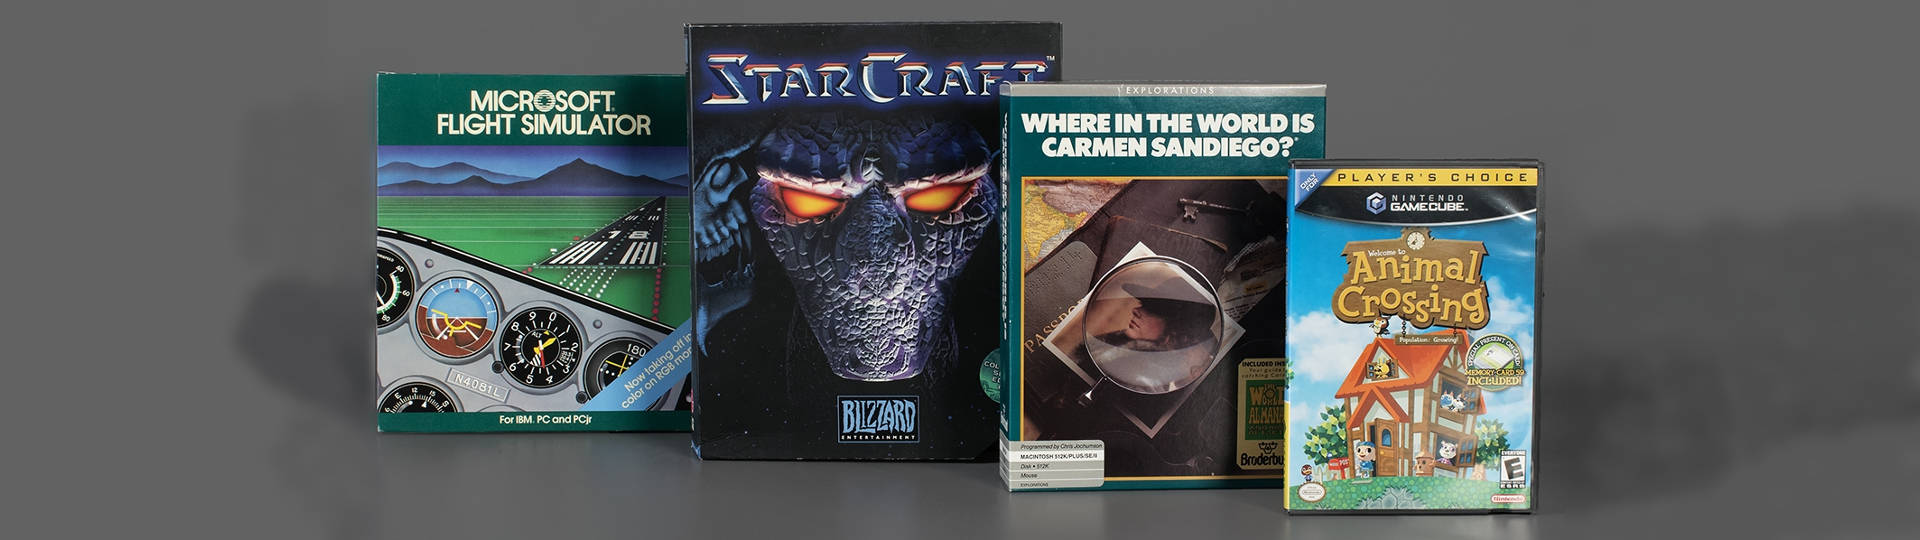 World Video Game Hall of Fame 2021 inductees slice